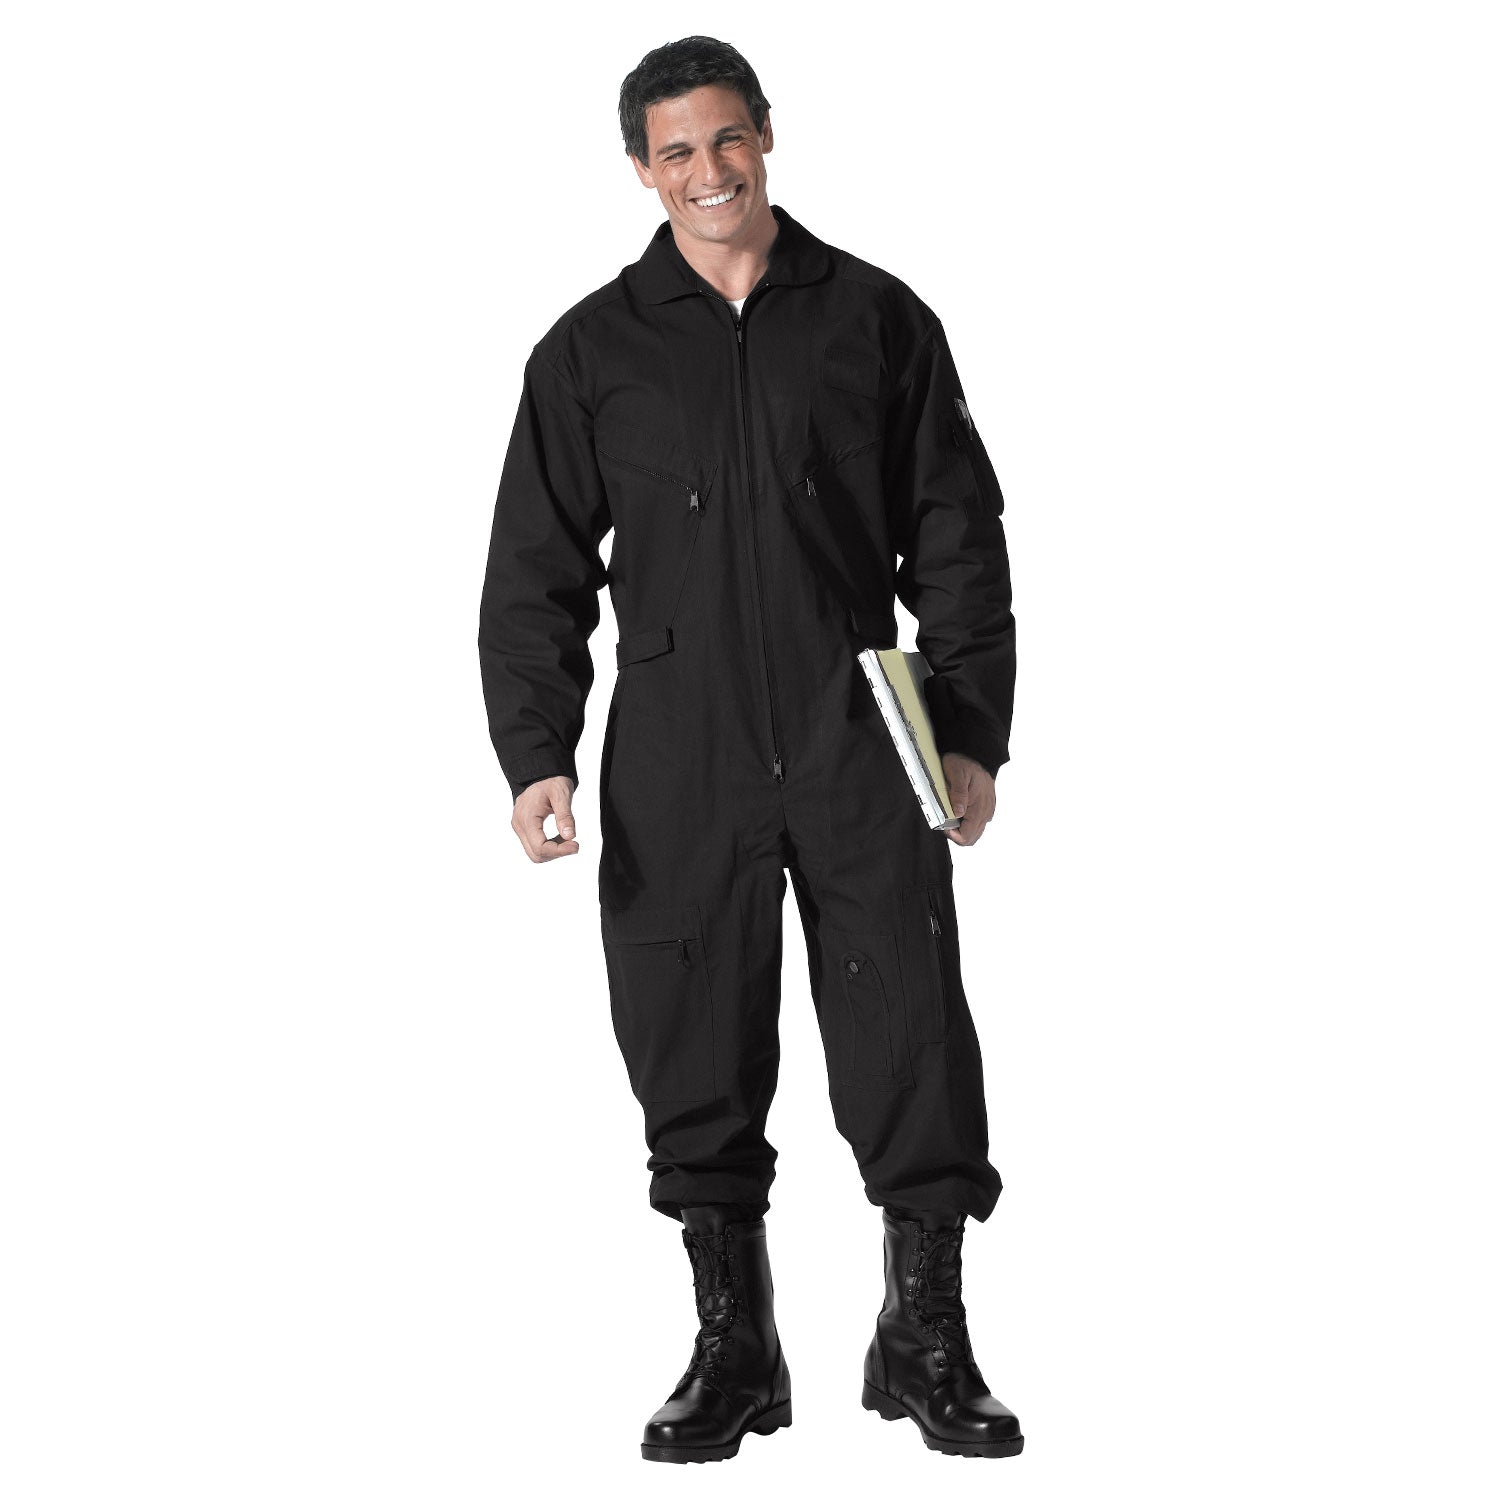 Take off and emulate classic Air Force style with Rothco’s Flightsuits